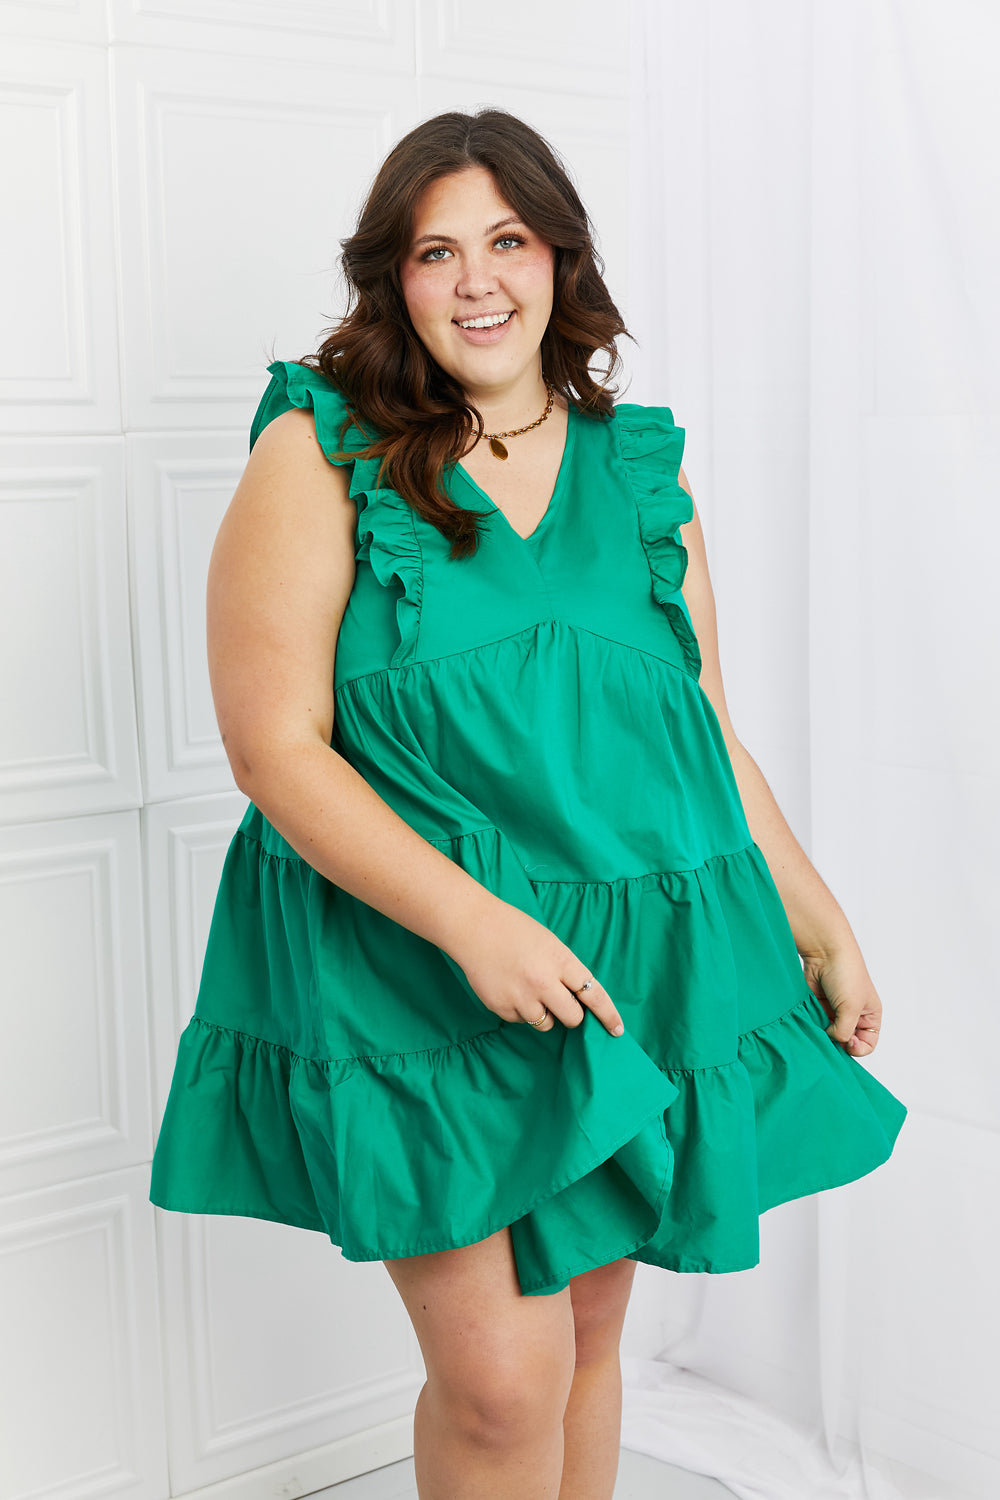 Hailey & Co Solid Green Tiered Frilly Mini Dress